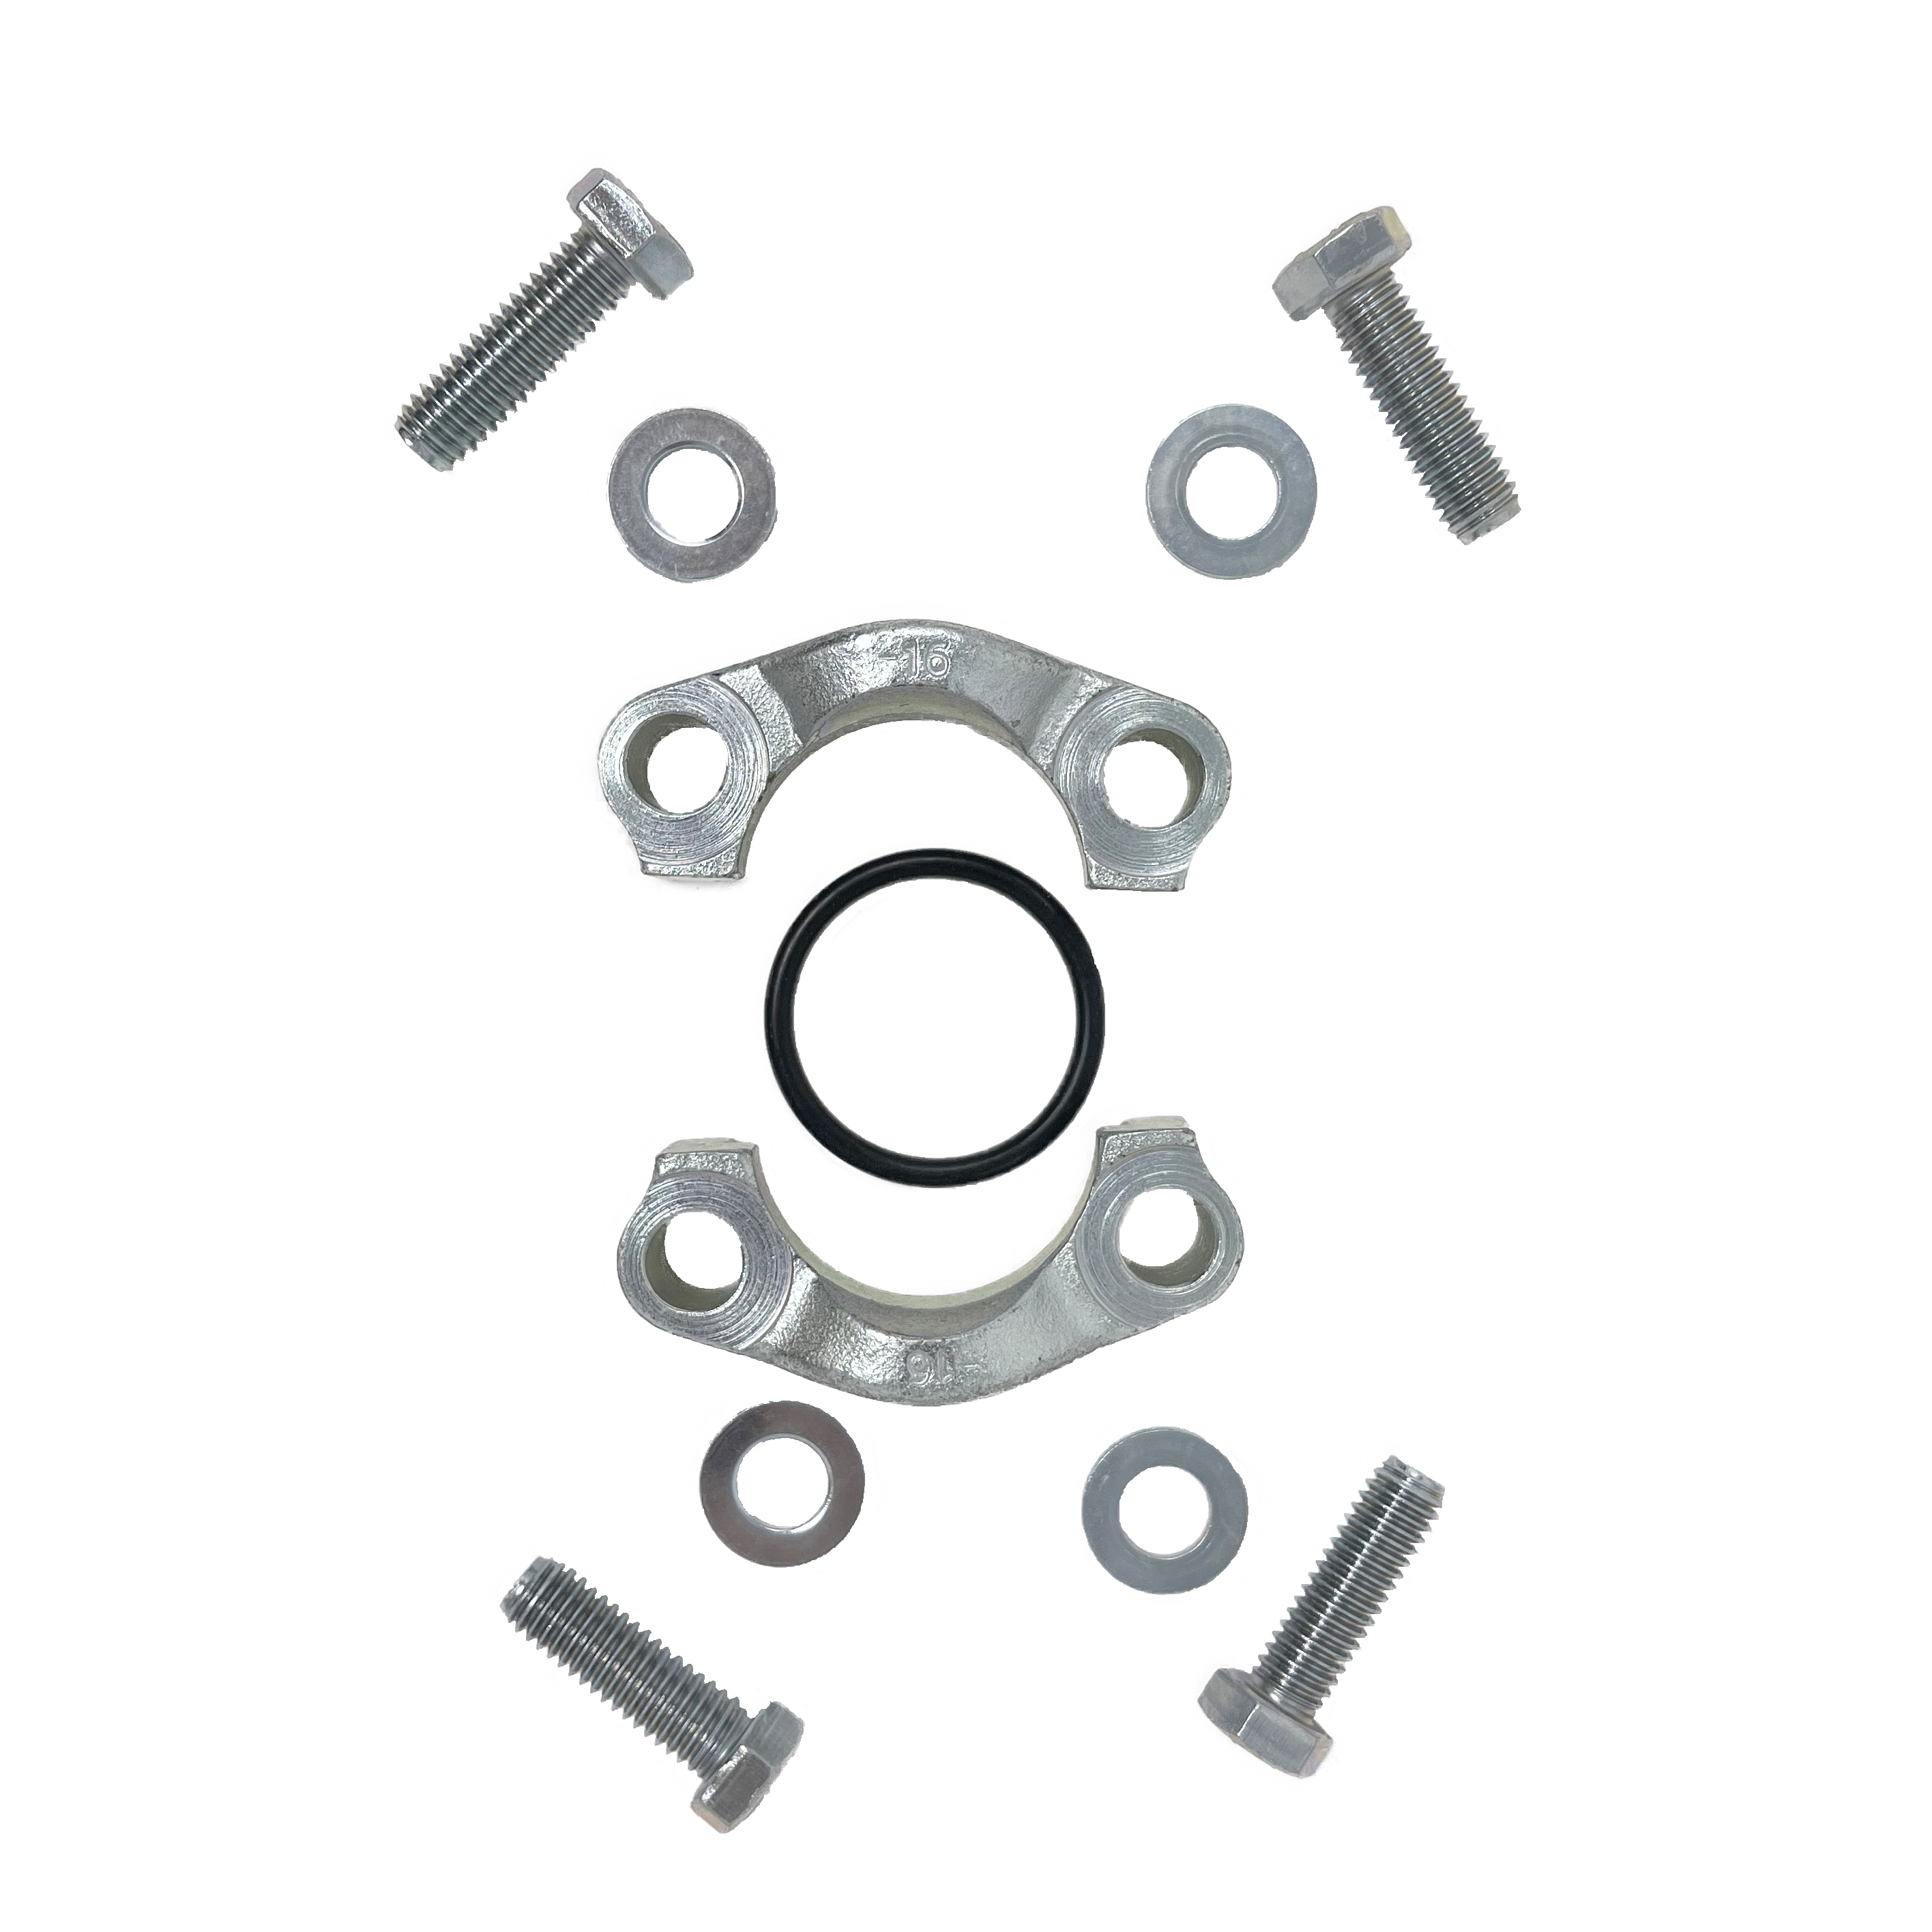 16SFO : AFP Split Flange Kit, Steel, 1" Code 61, 3000psi, Includes two (2) halves, four (4) bolts, four (4) washers, and one (1) O-Ring